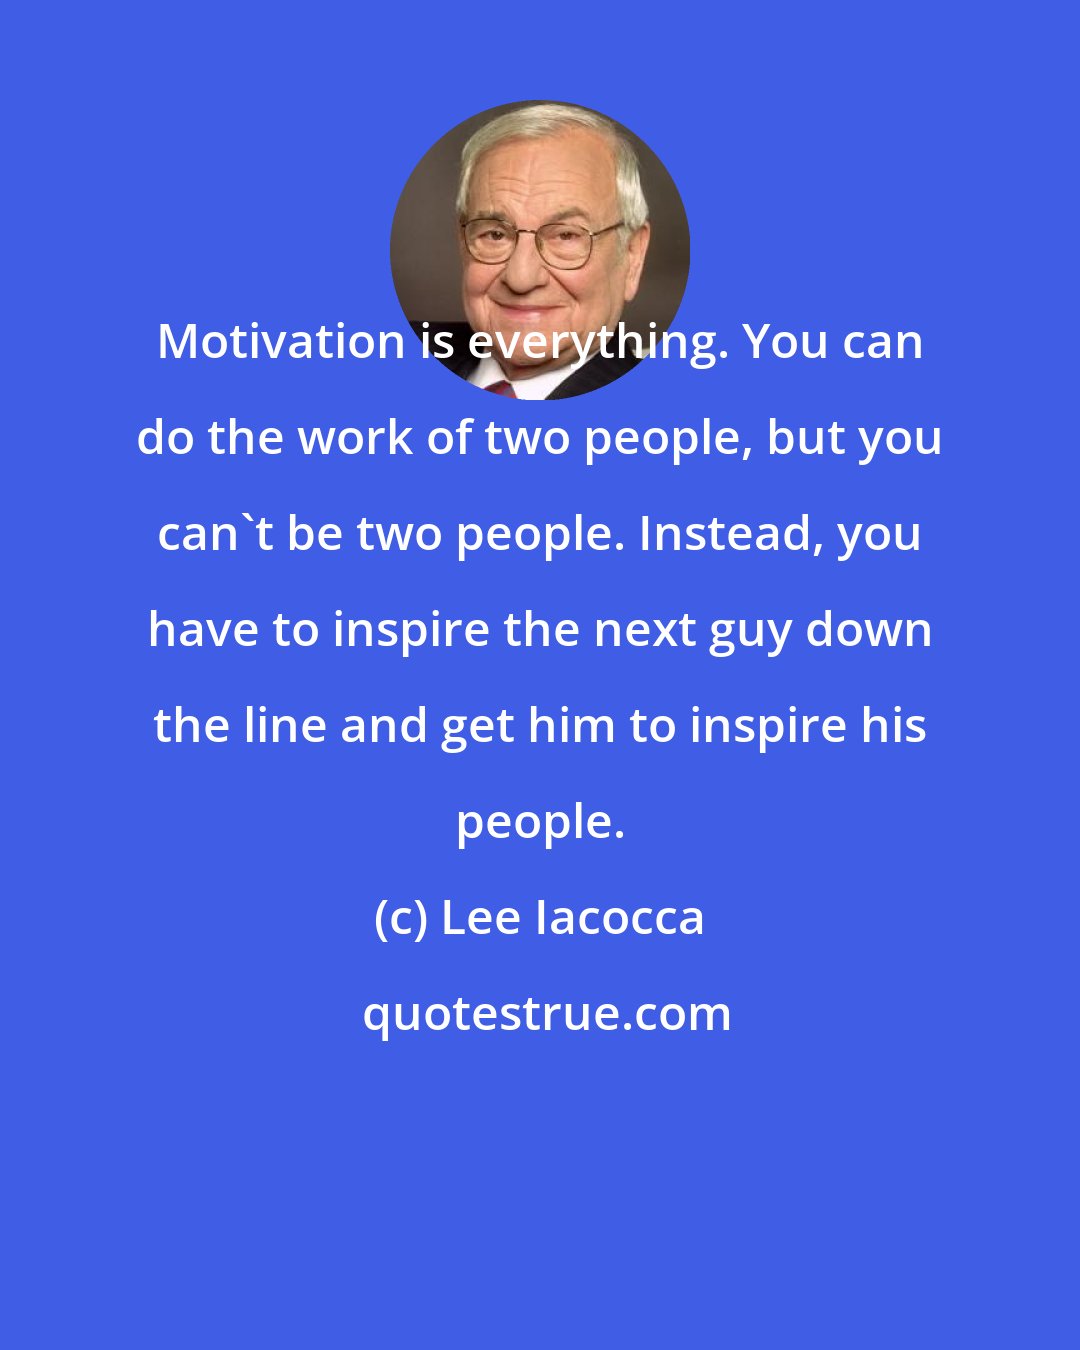 Lee Iacocca: Motivation is everything. You can do the work of two people, but you can't be two people. Instead, you have to inspire the next guy down the line and get him to inspire his people.